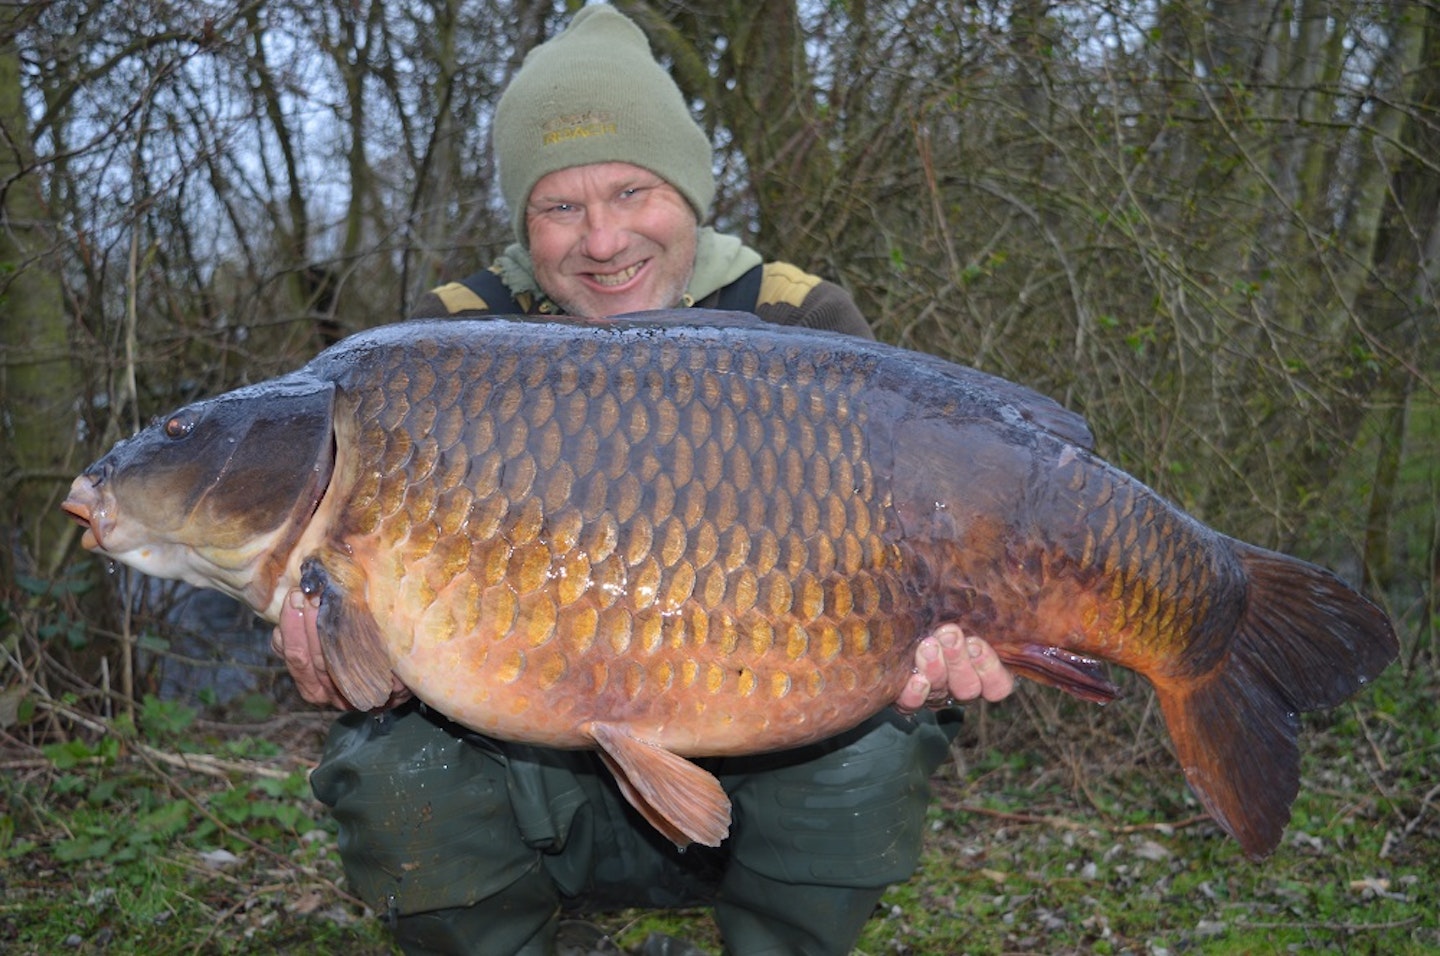 Gary Denniss with 'Patch' at 42lb 12oz